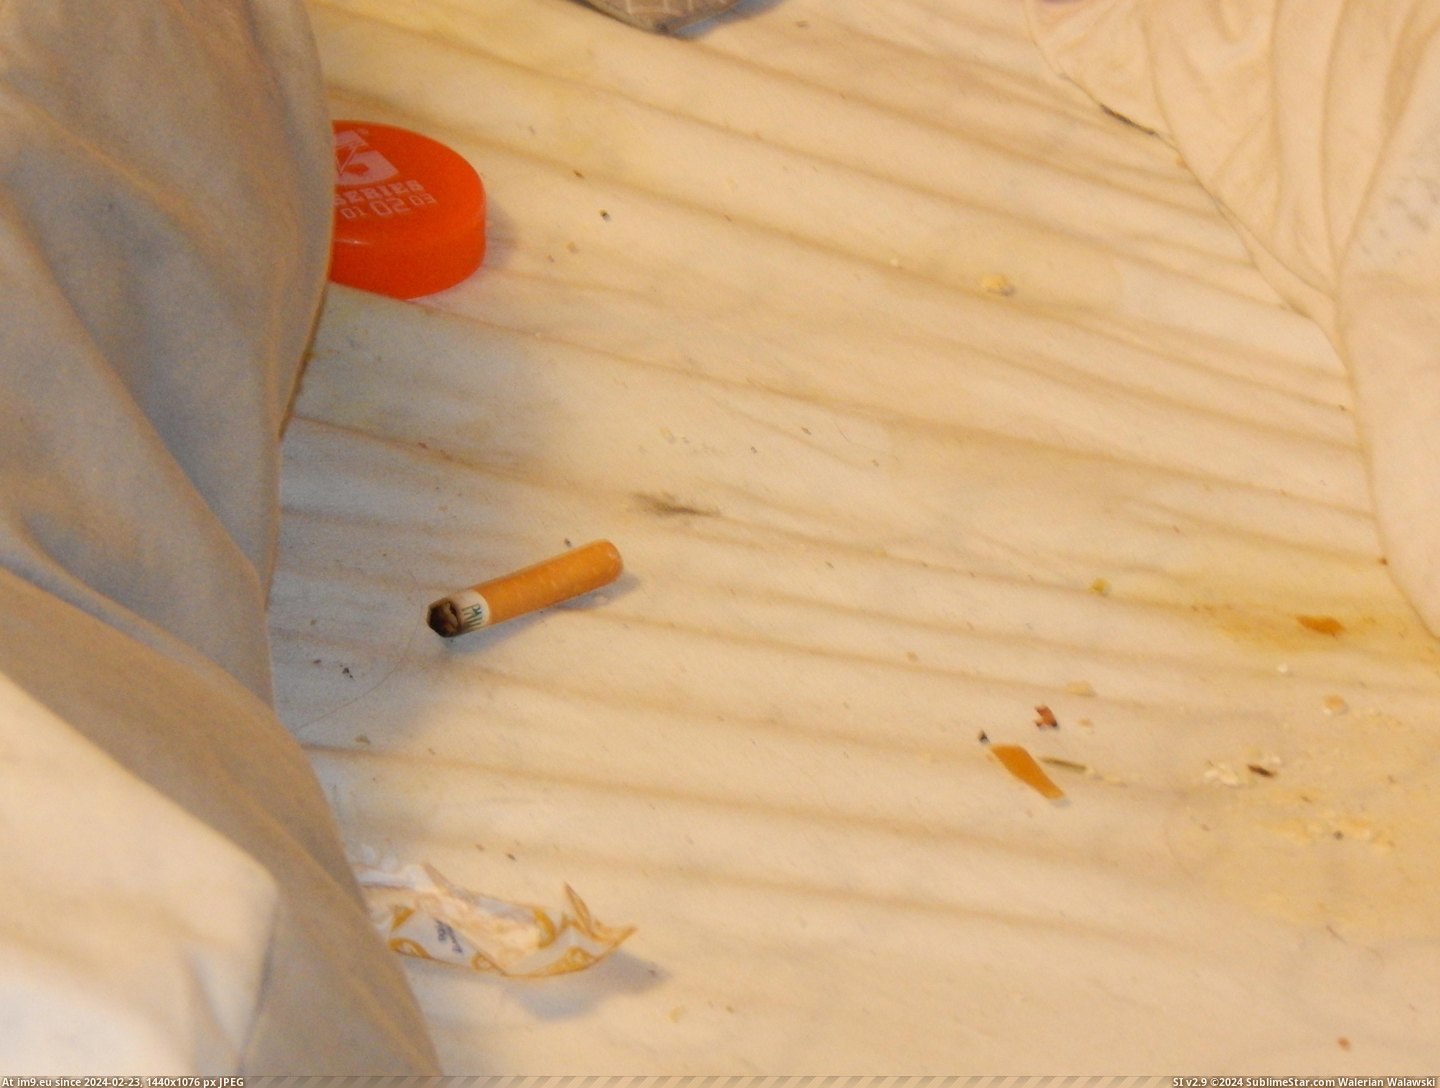 #Wtf #Was #Room #Checked #Worse #Cigs #Roommate #Smoking #Lying [Wtf] Roommate was lying about smoking cigs in her room, when we checked, what we found was definitely worse 5 Pic. (Изображение из альбом My r/WTF favs))